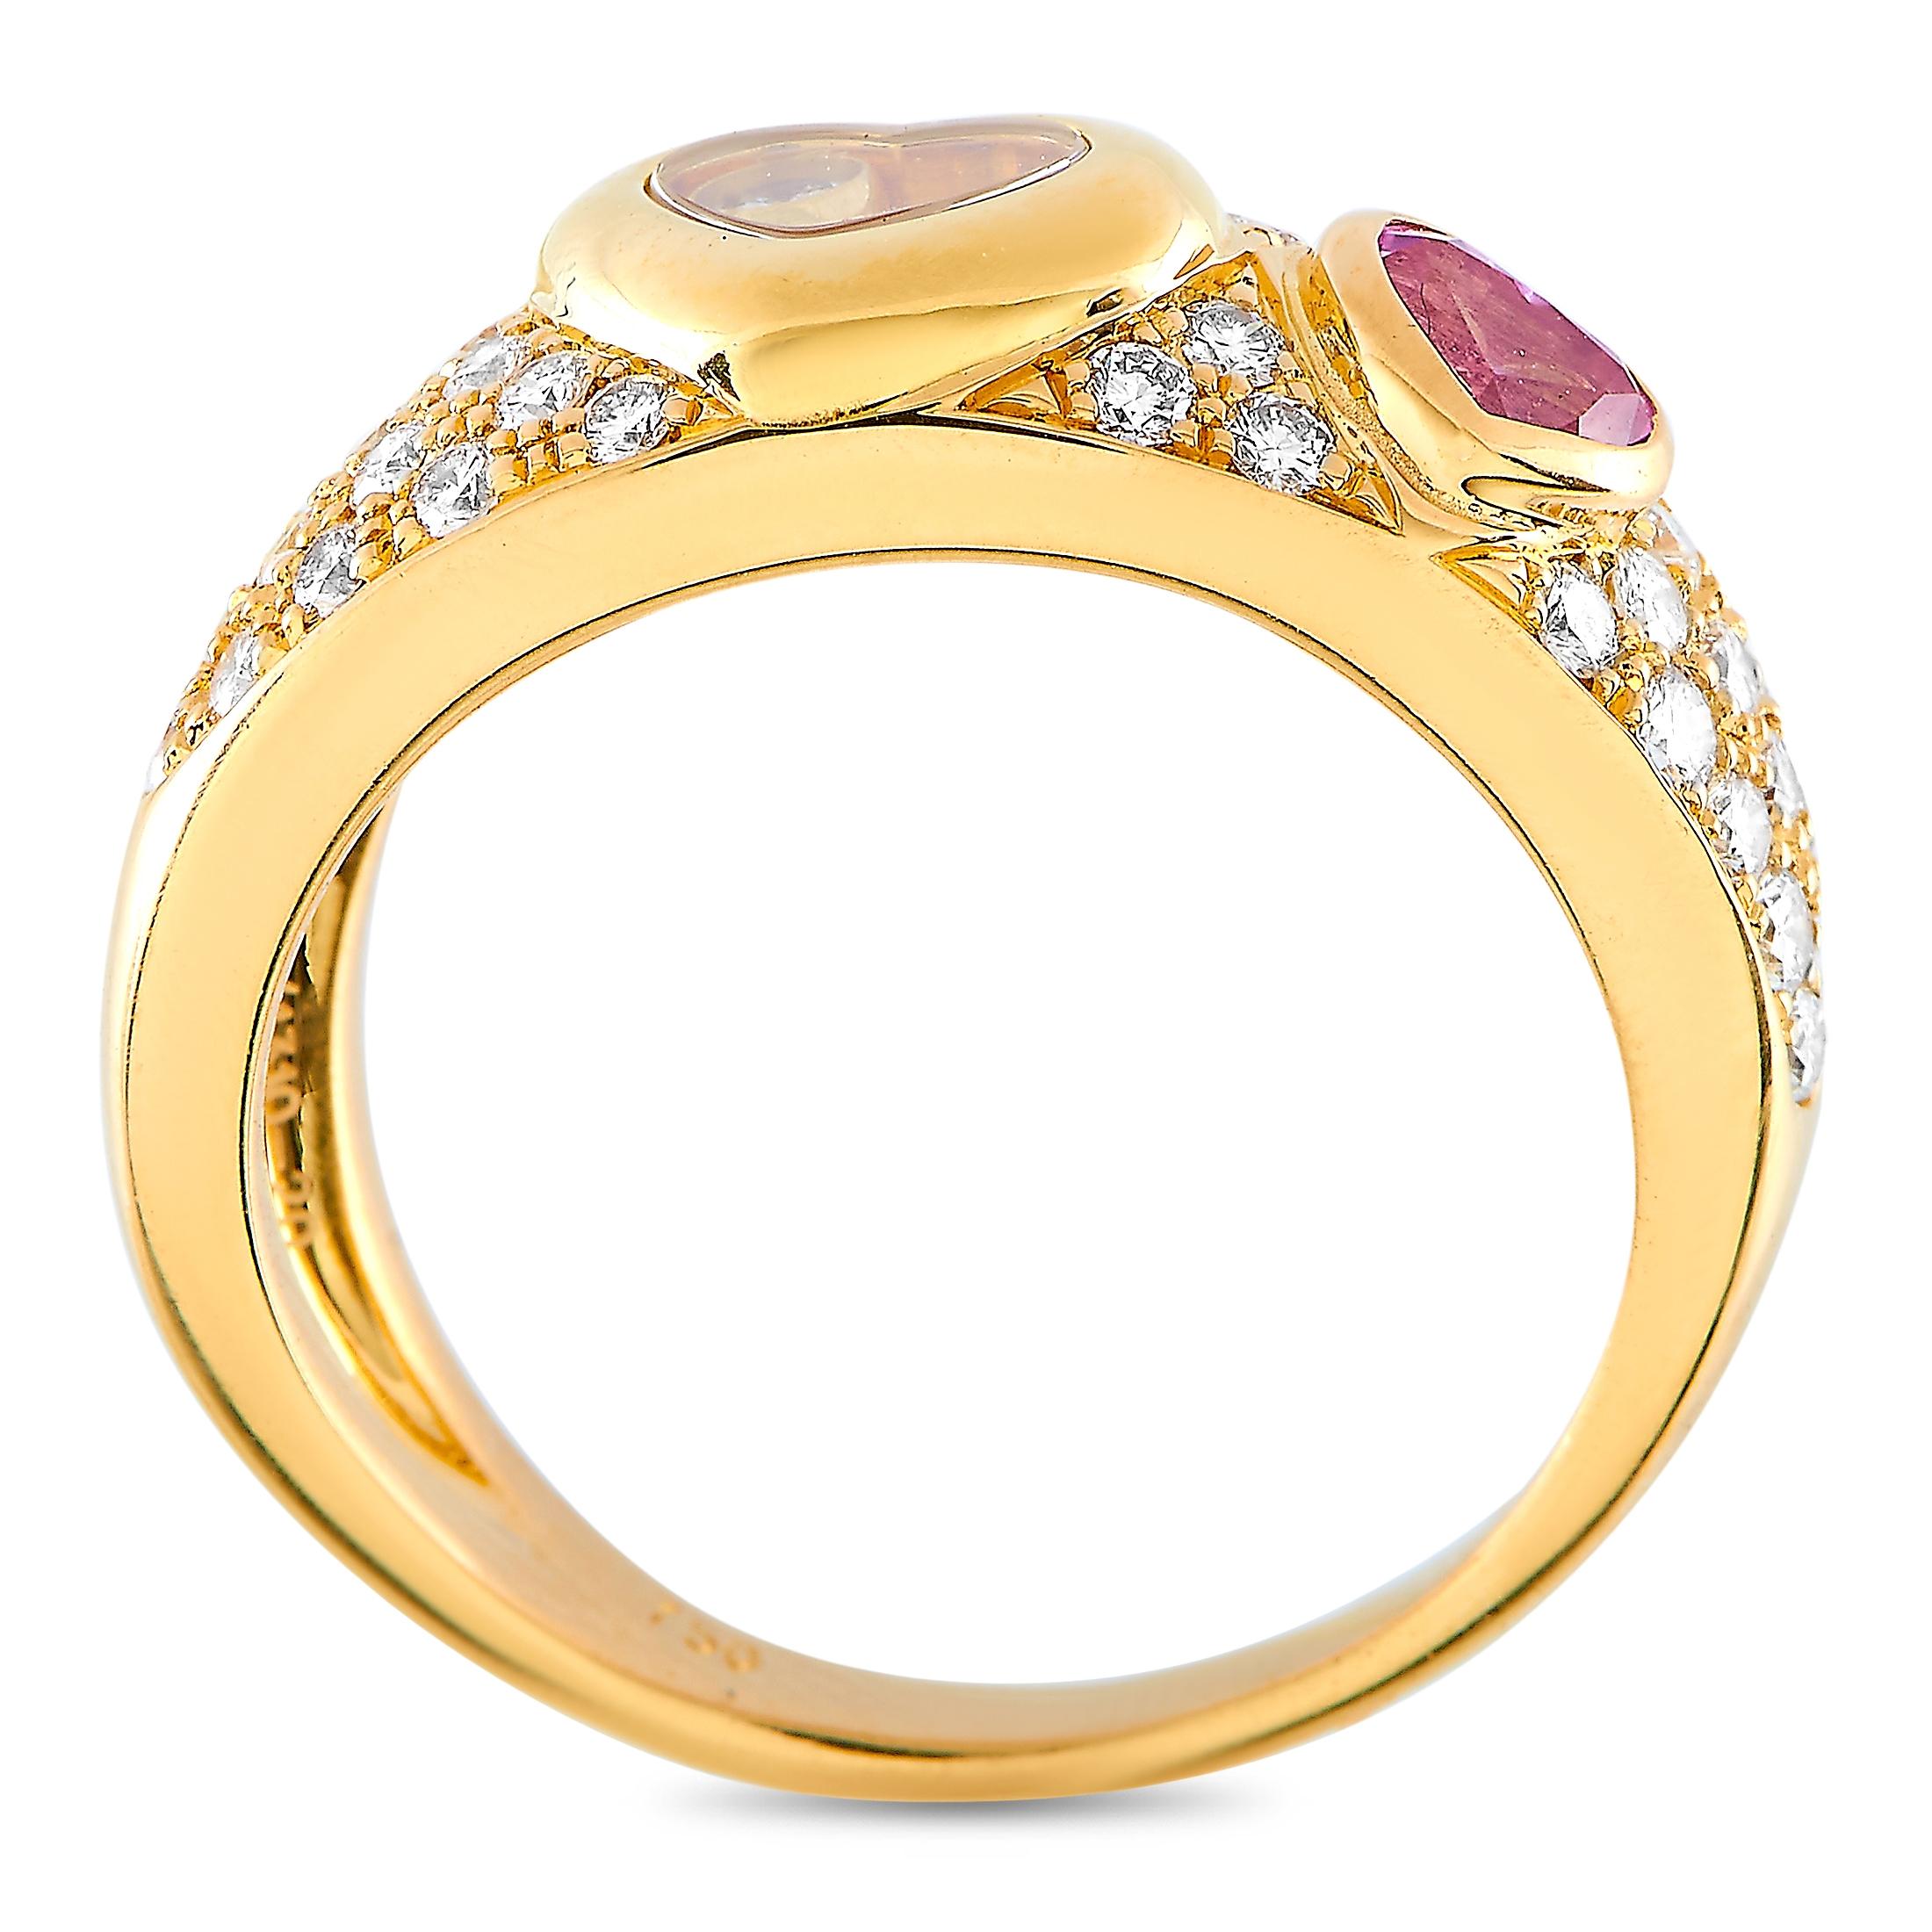 The Chopard “Happy Diamonds” ring is made of 18K yellow gold and embellished with a heart-shaped pink sapphire and a total of 0.65 carats of diamonds. The ring weighs 7.8 grams and boasts band thickness of 4 mm and top height of 5 mm, while top